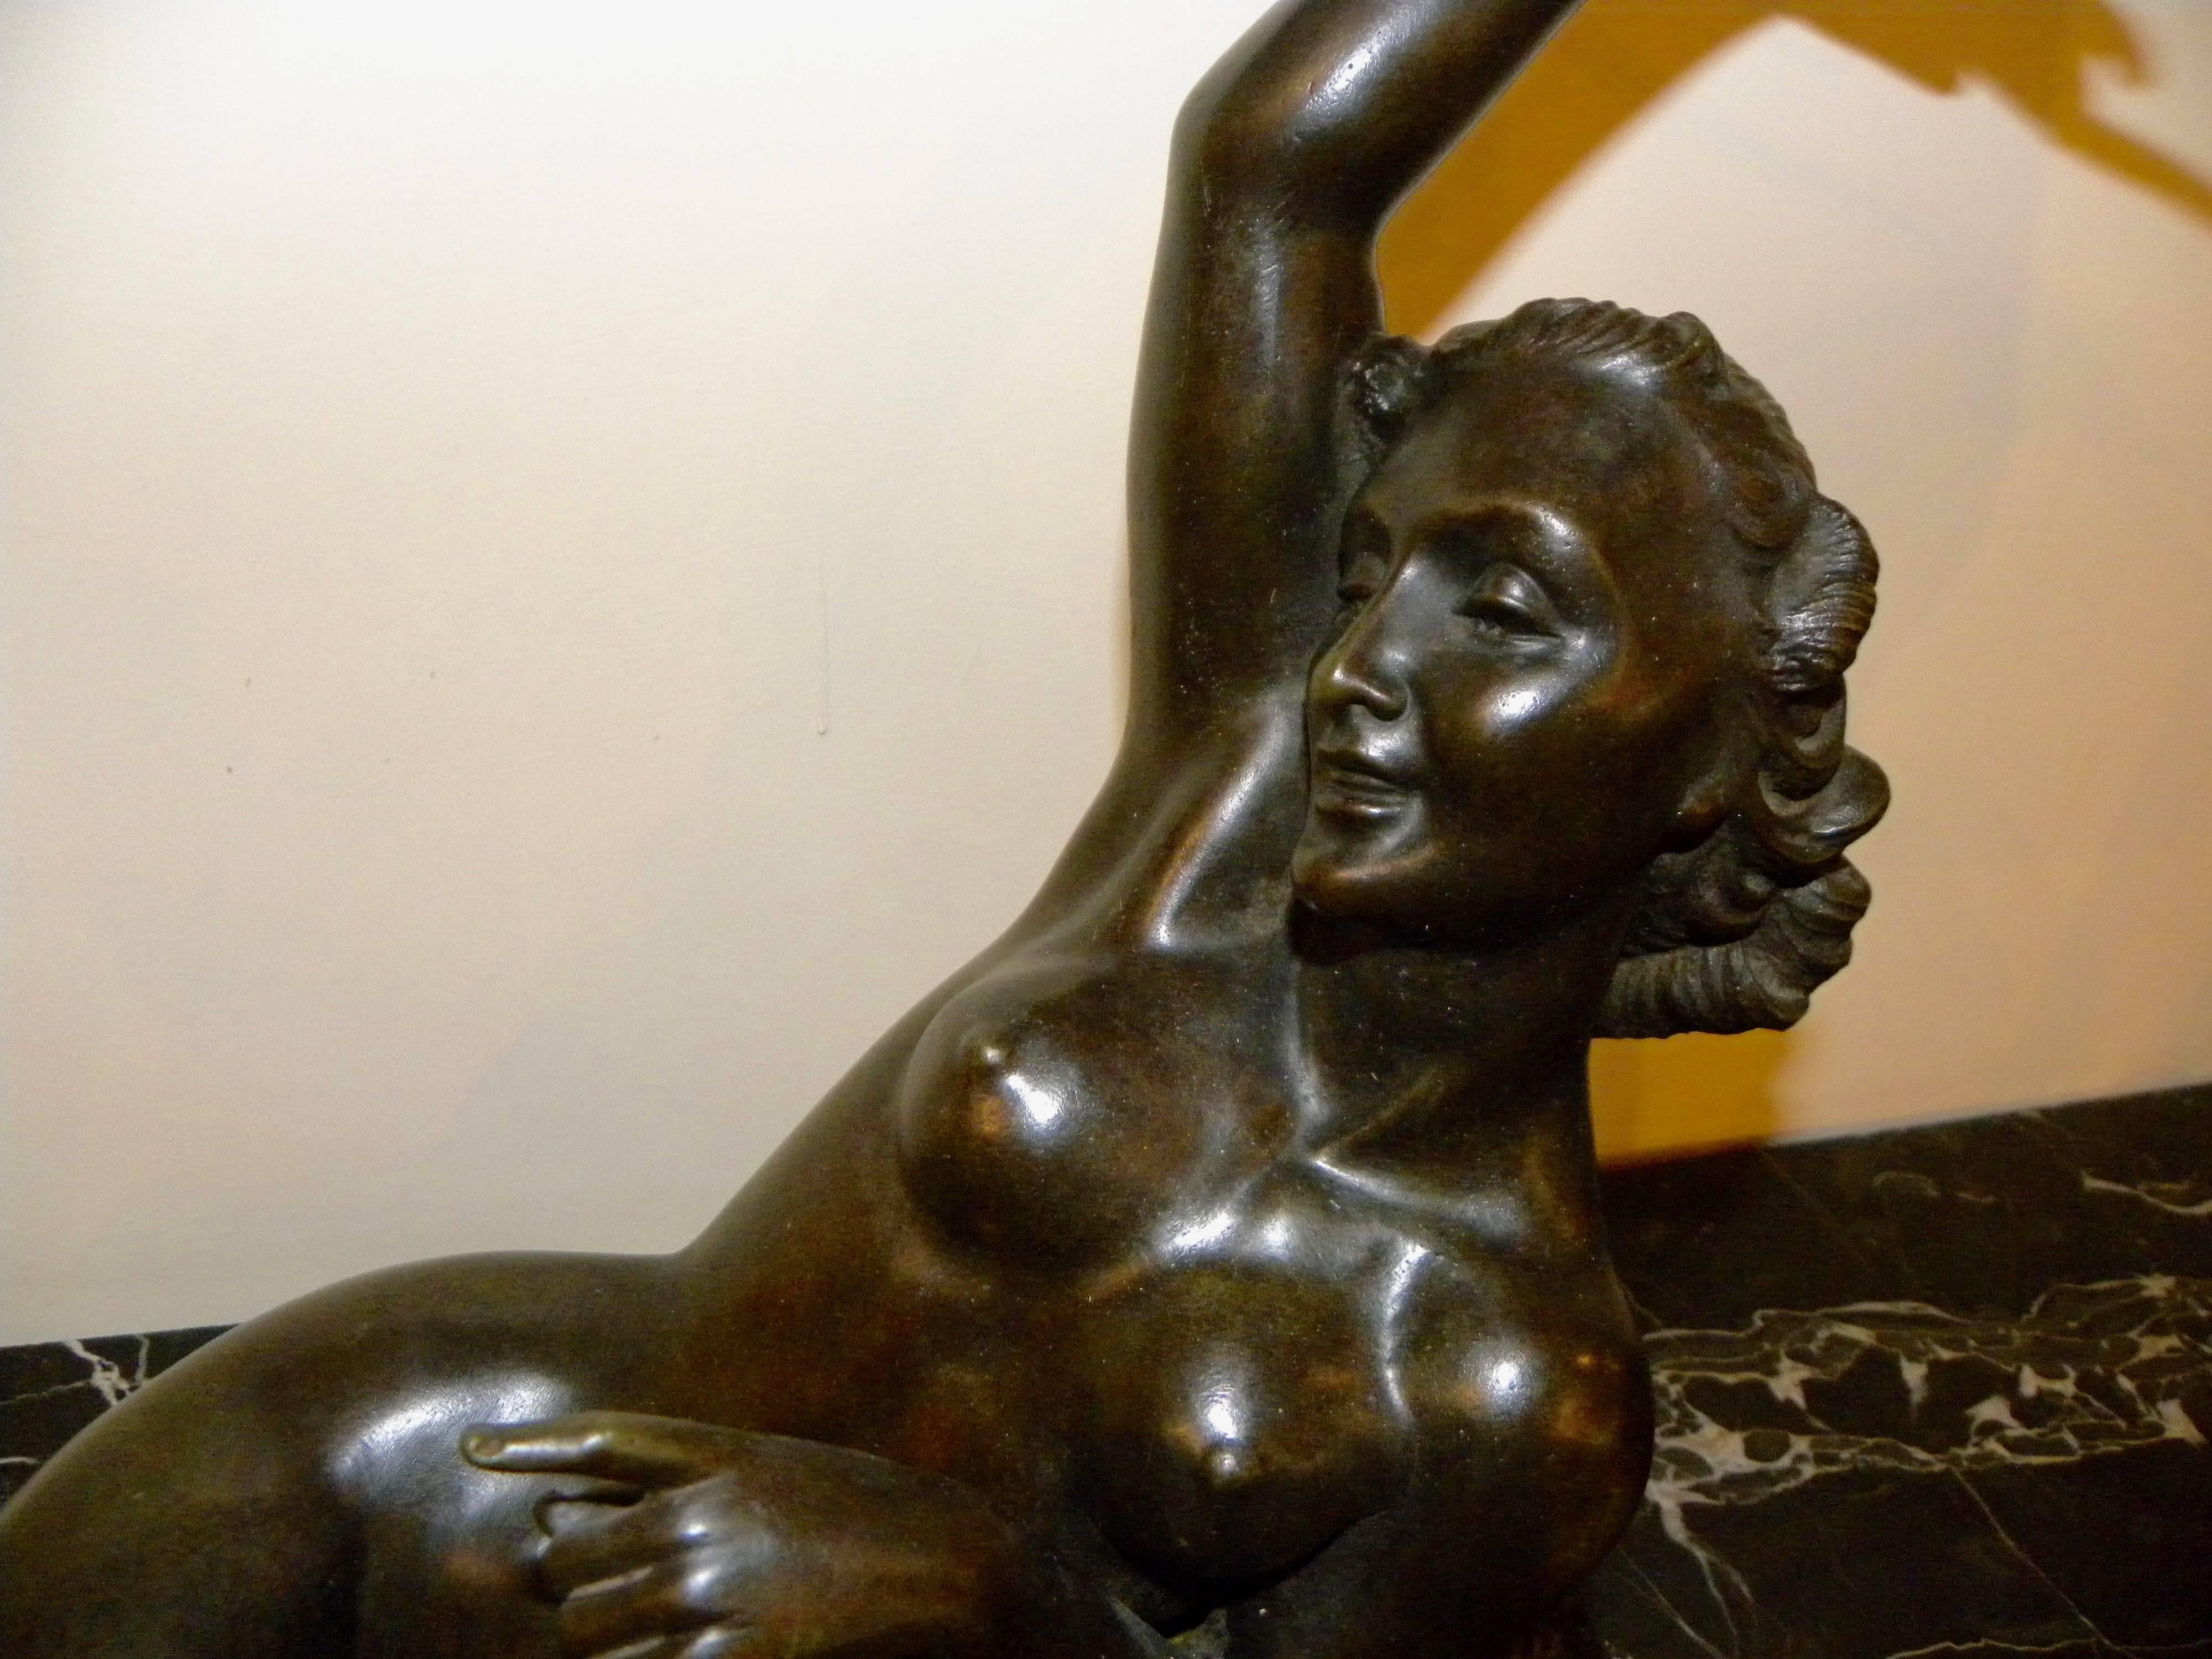 An Art Deco era reclining nude bronze sculpture by Salvatore Melani, created at the end of his career which began in his early 1920s and ended in 1934 at the age of 32. The serene and sensual pose is defined by her beautiful features which are